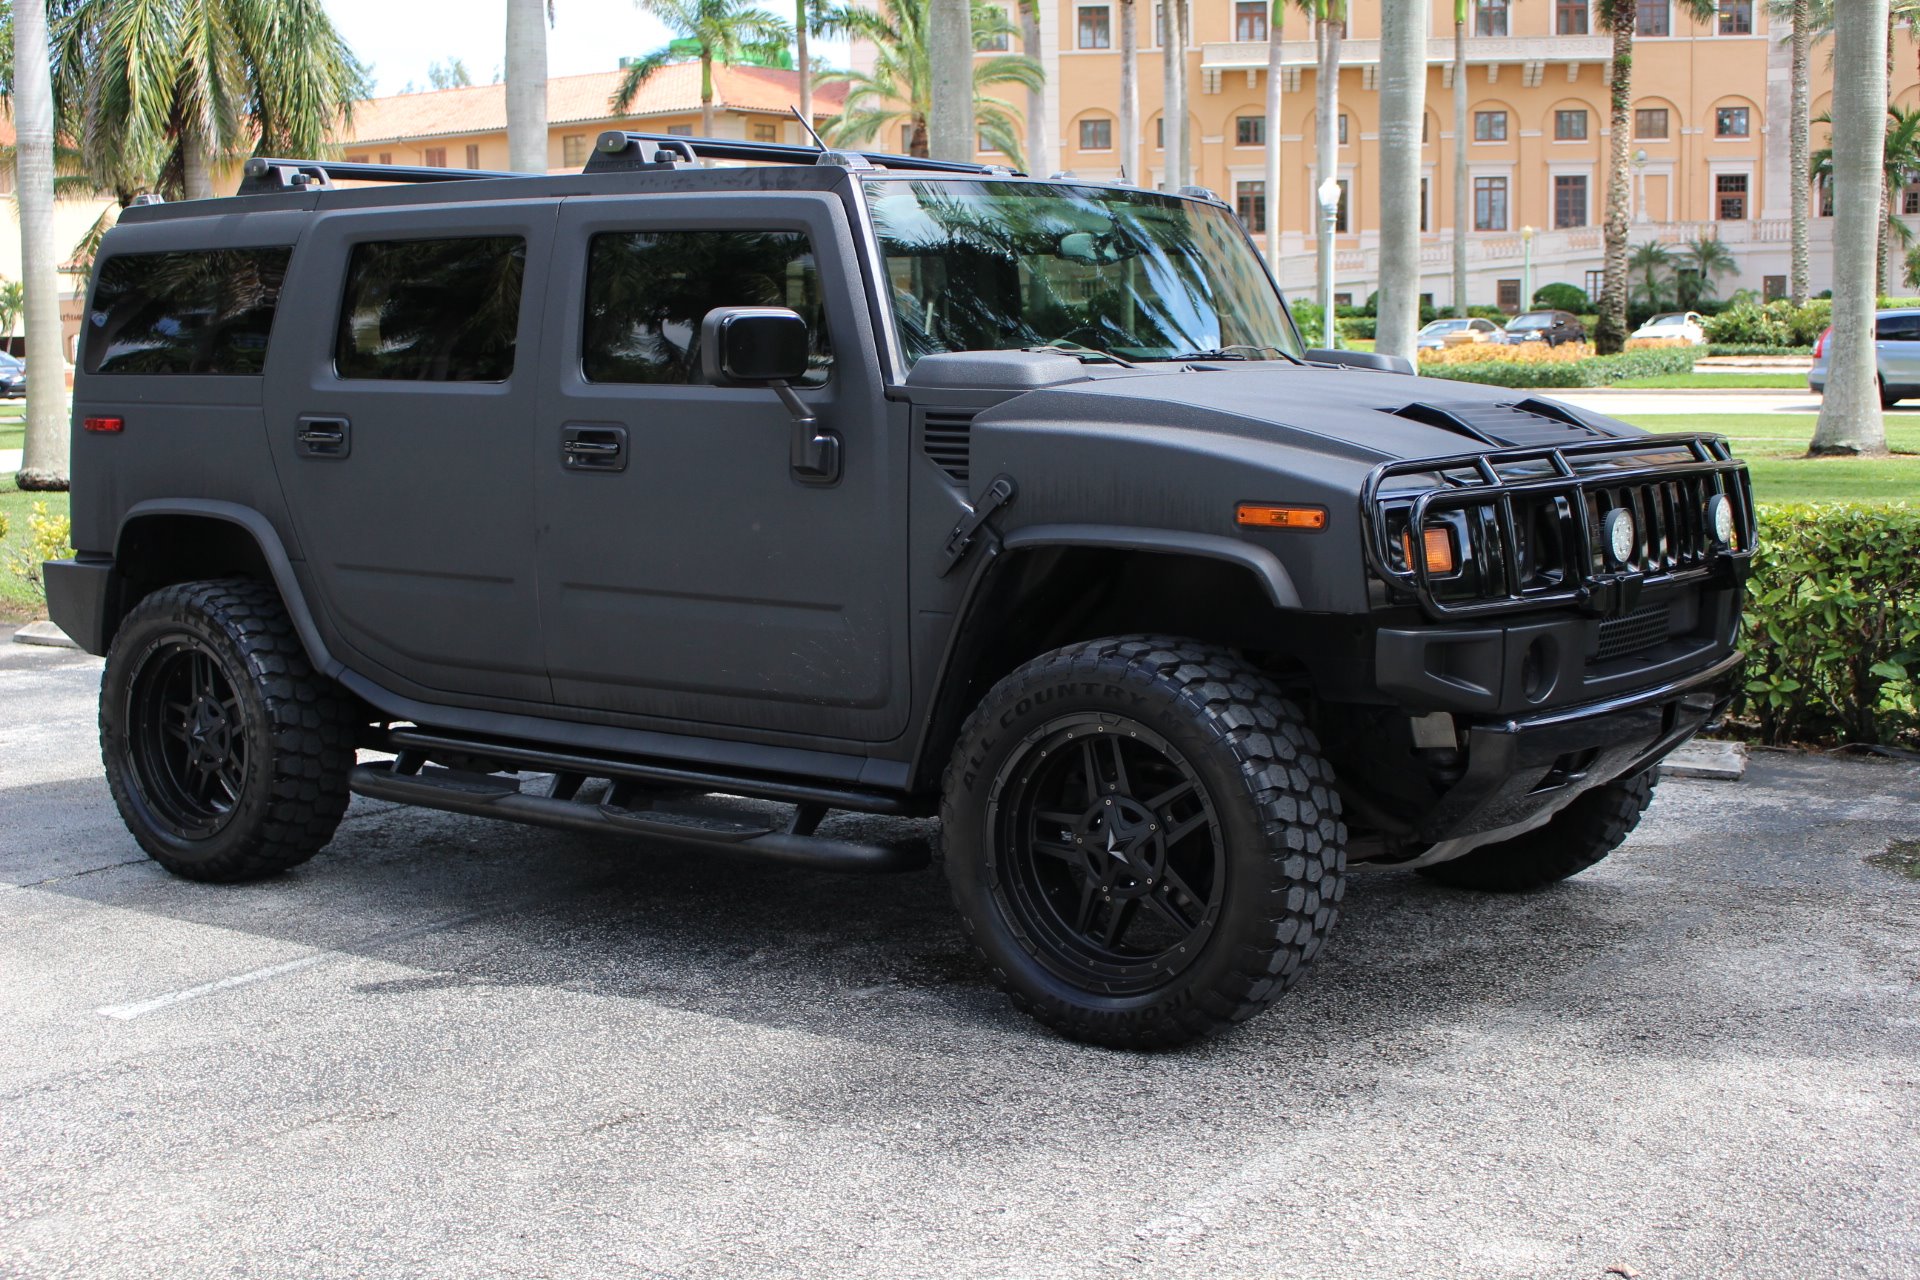 Used 2003 HUMMER H2 Lux Series for sale Sold at The Gables Sports Cars in Miami FL 33146 4